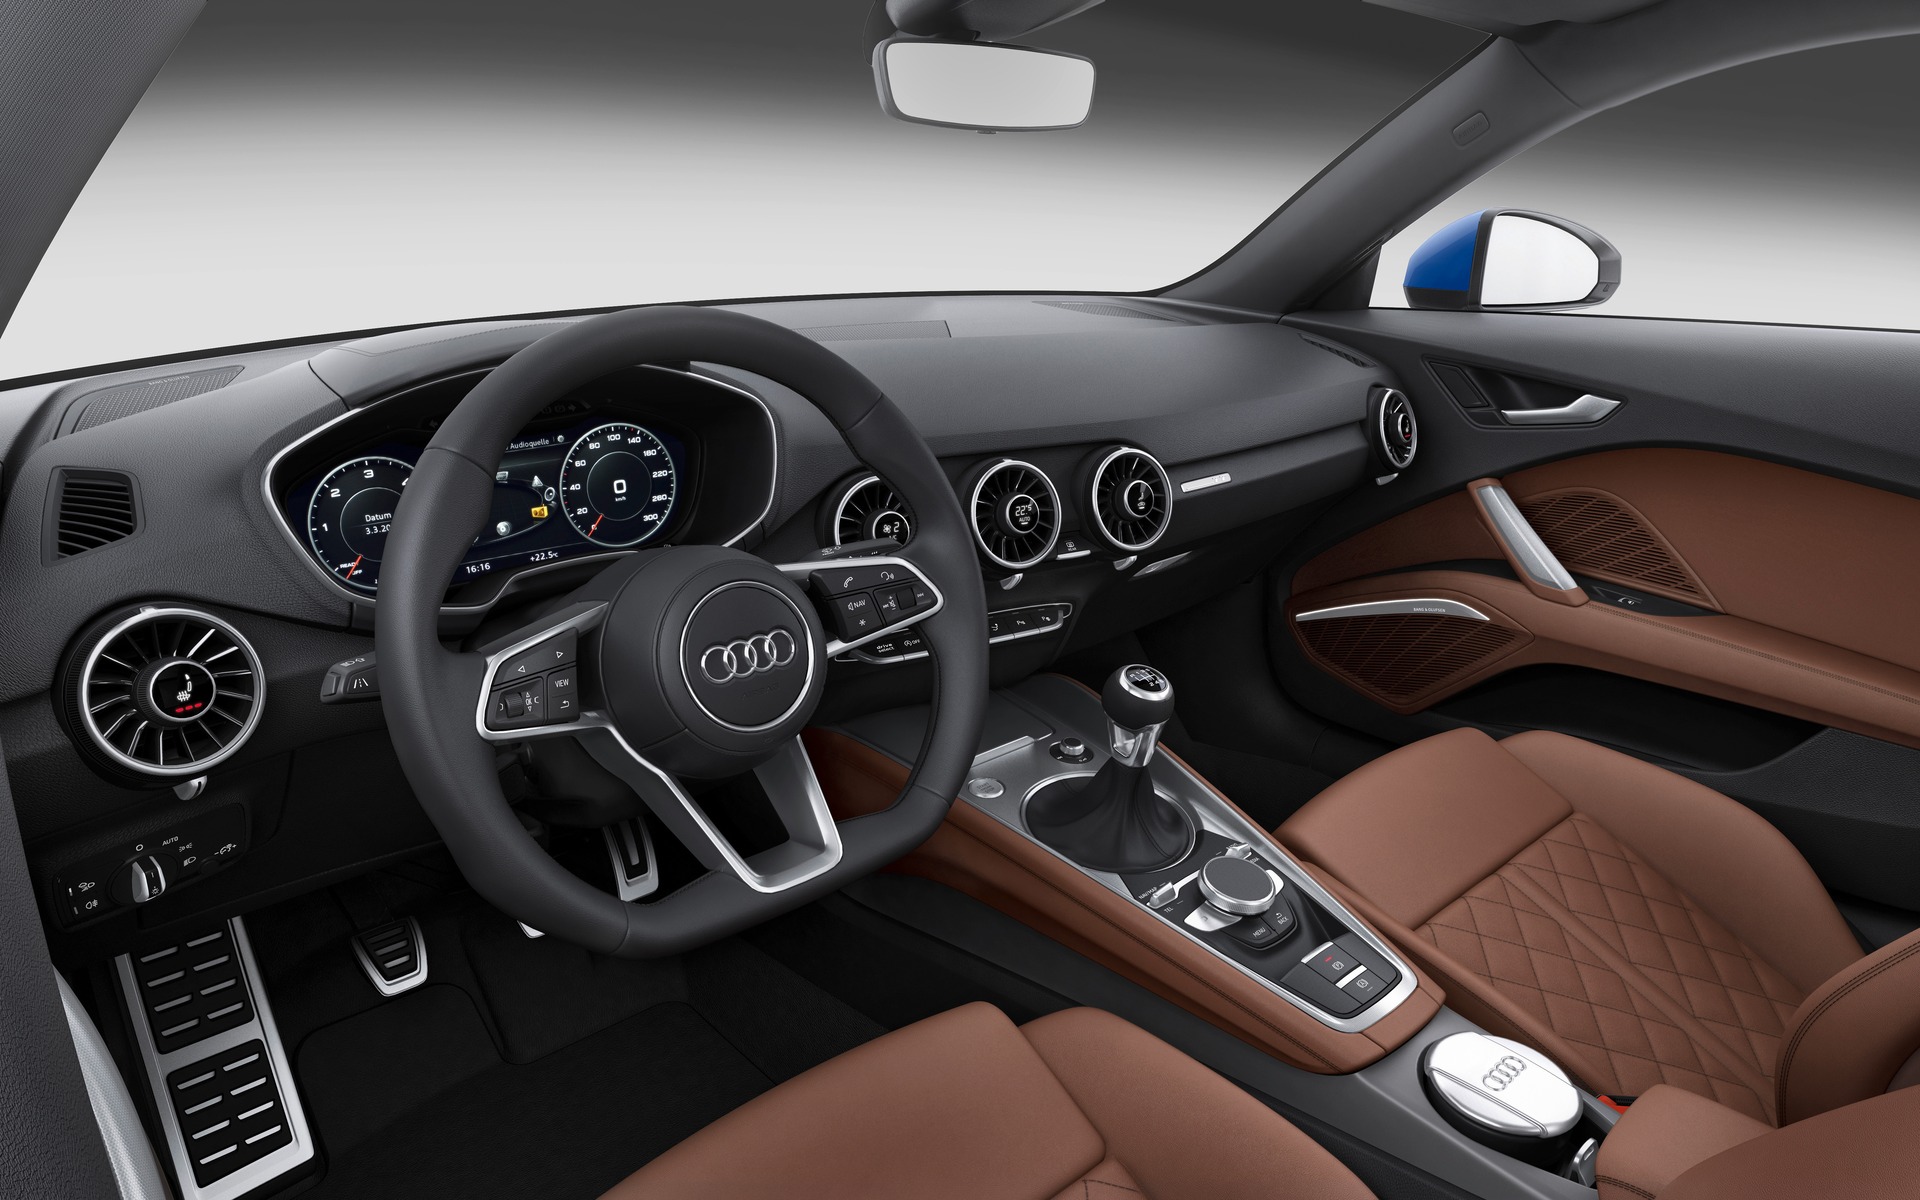 2016 Audi TT - A screen replaces the instrument cluster